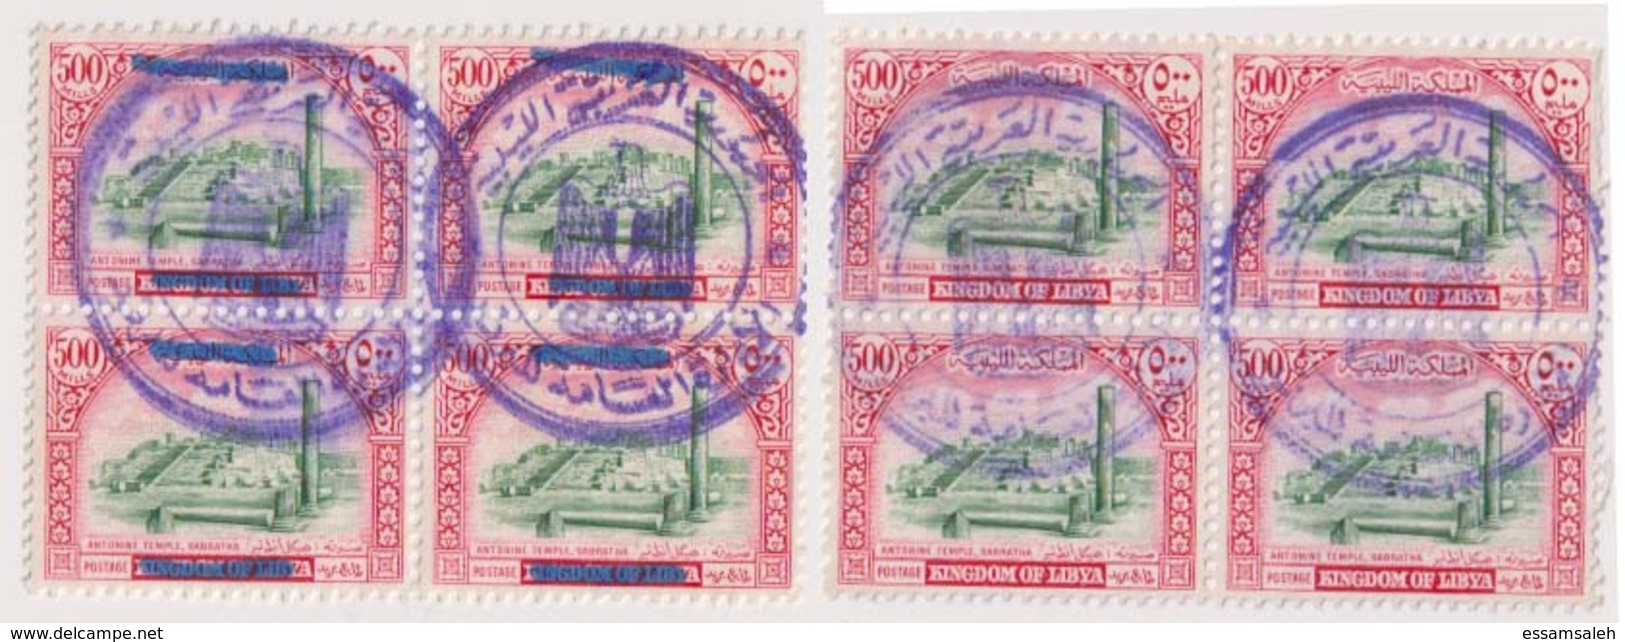 LYS05511 Republic Of Libya On Kingdom 2 Blocks One Only Surcharged With Bar - Used - Libya